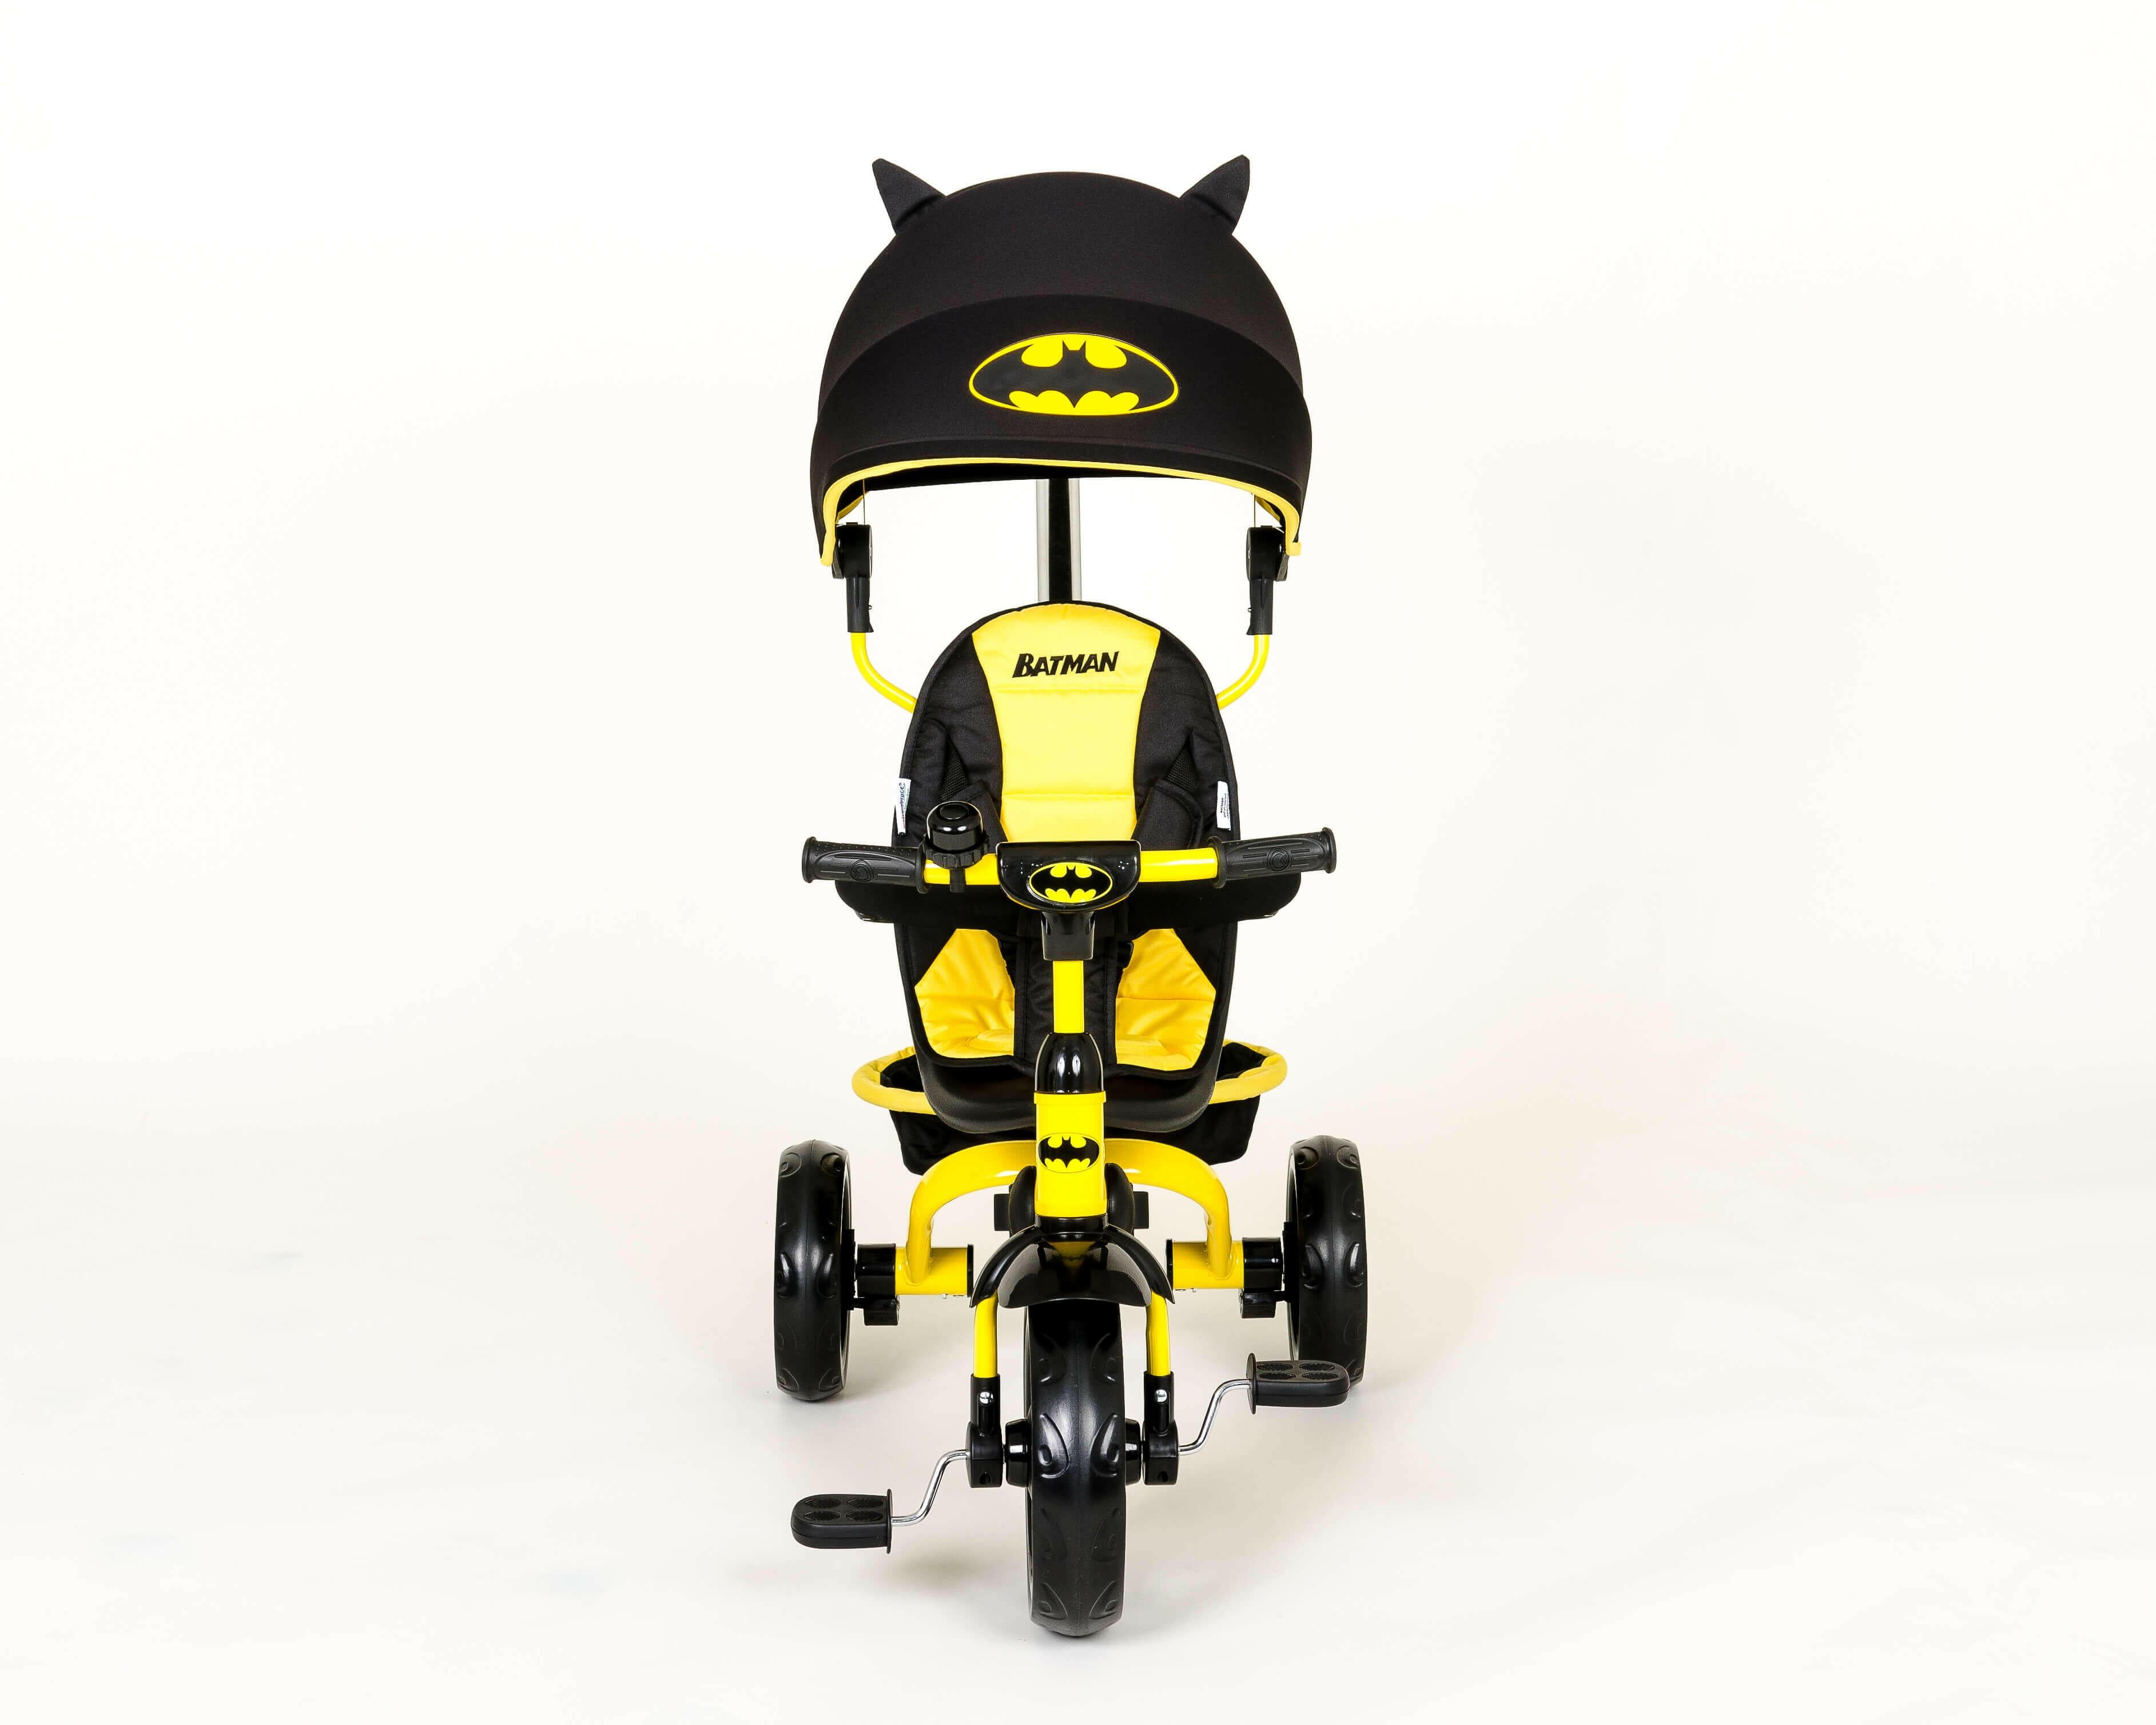 Kids Batman 4-in-1 Push and Ride Stroller Tricycle with Foldable Roof - Kids Eye Candy 